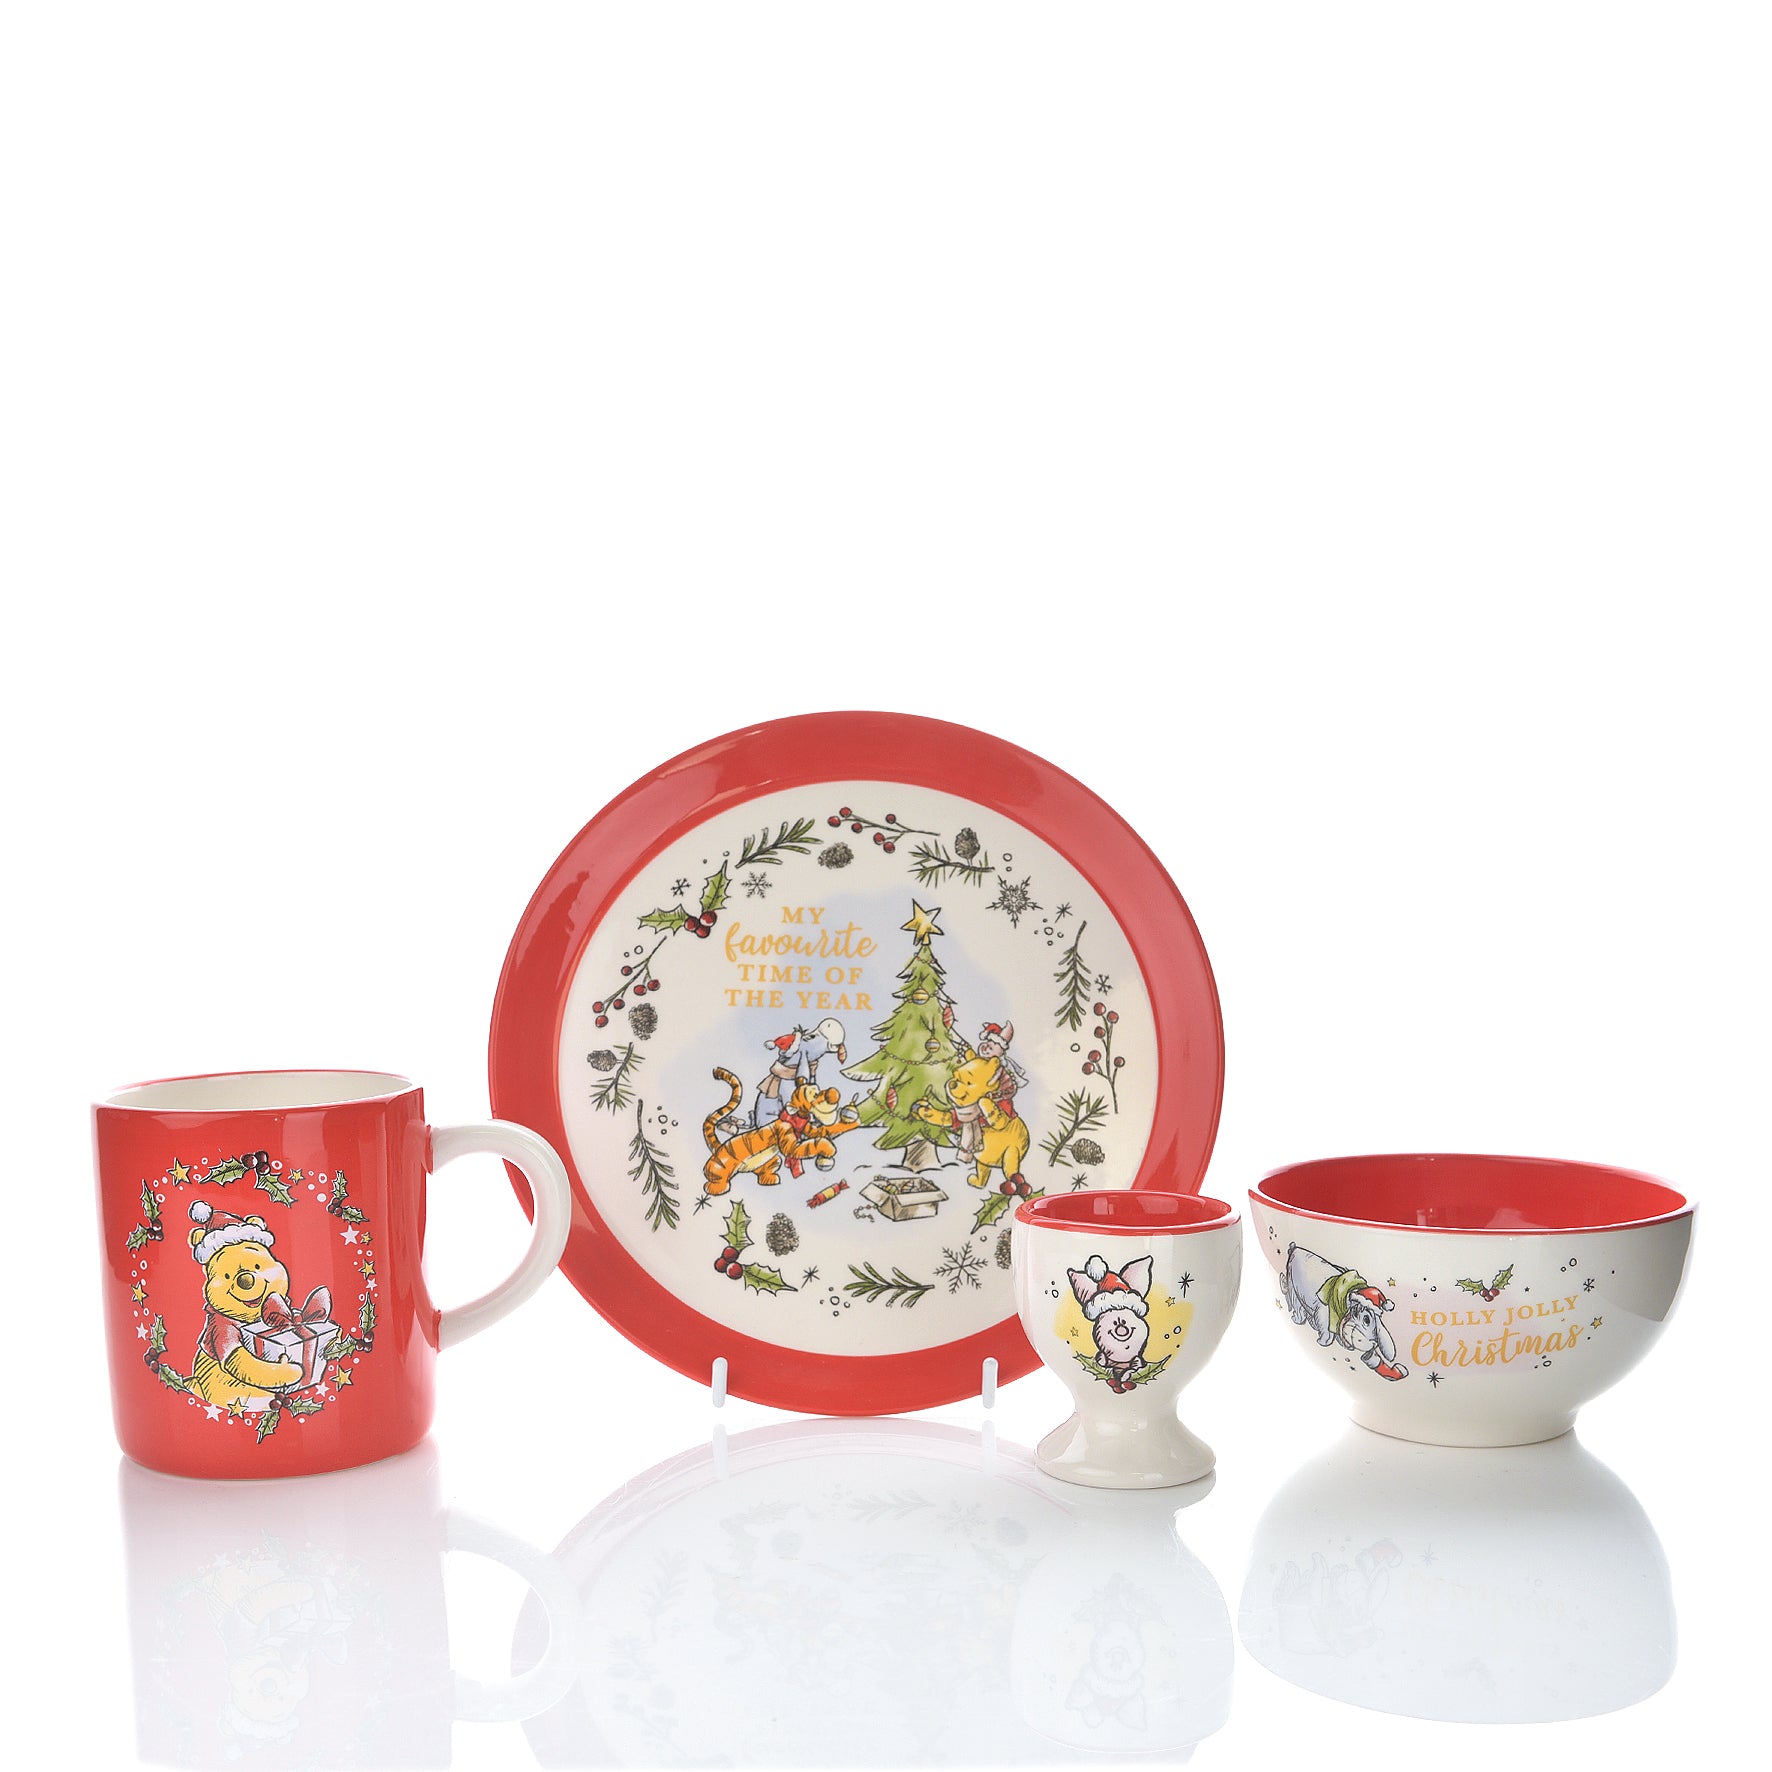 cute Winnie the Pooh ceramics dinner set. This set includes a plate, mug, egg cup and bowl, making it the perfect gift 